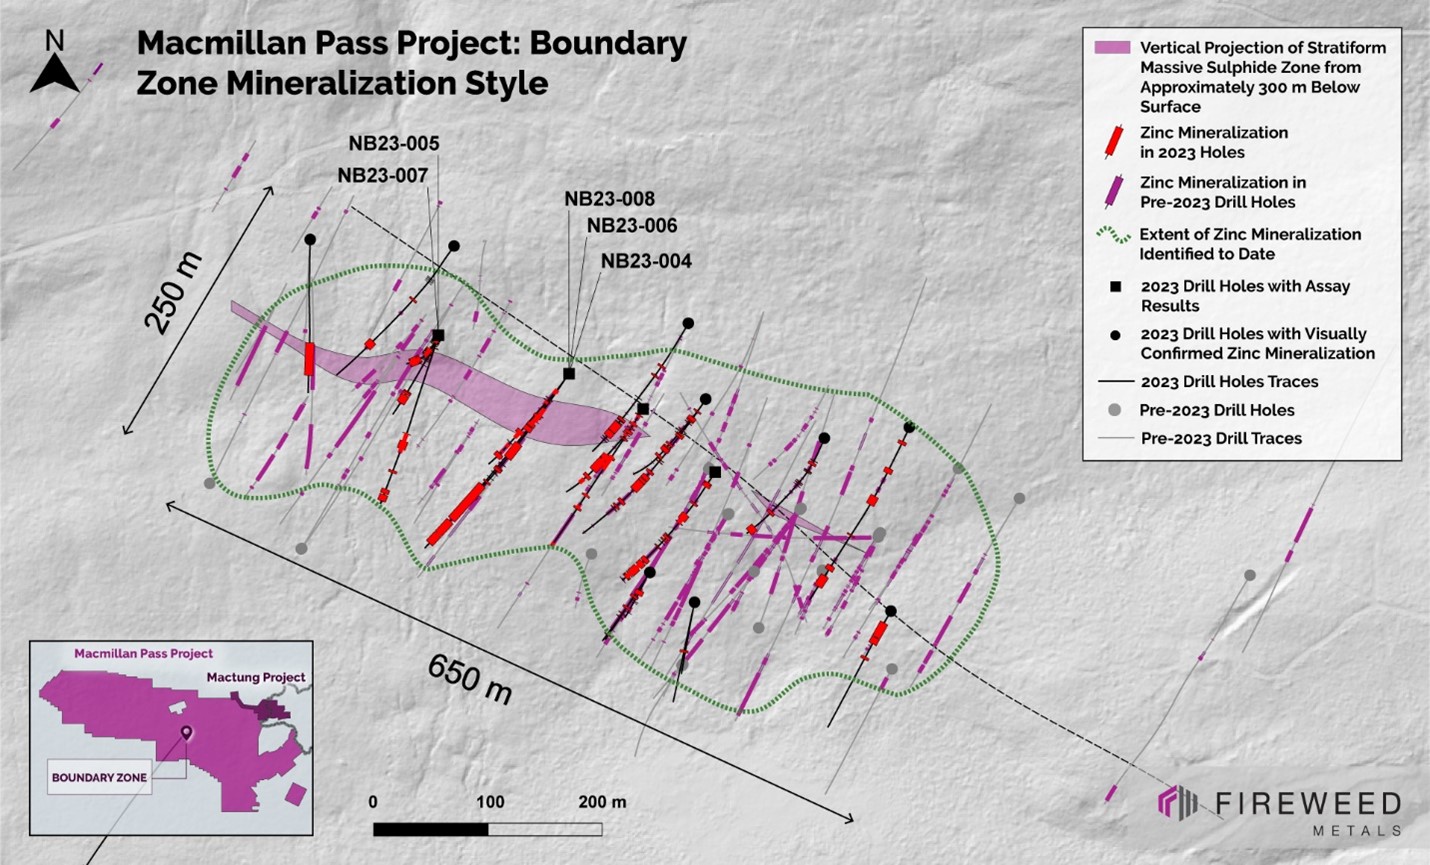 Map 3: Mineralized intervals in 2023 drilling and pre-2023 drilling defining a stratiform laminated to massive sulphide zone that is connected at depth (pink polygon) and a broader envelope of vein, breccia, and other stratiform zinc mineralization, showing significant areal extent (within green dashed line).